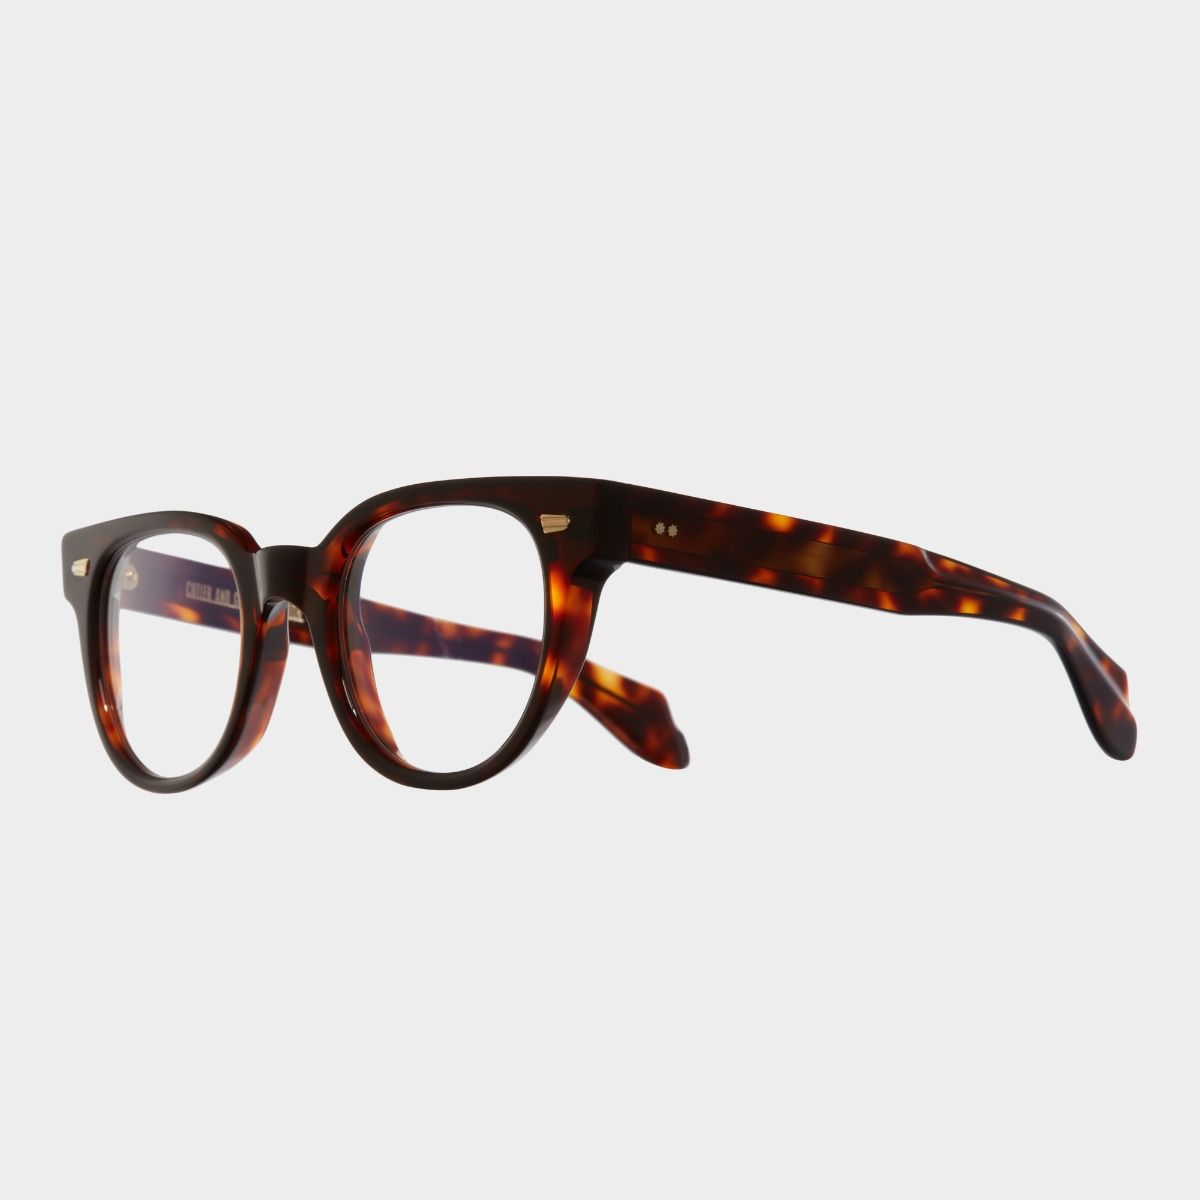 Cutler and Gross, 1392 Optical Round Glasses - Dark Turtle